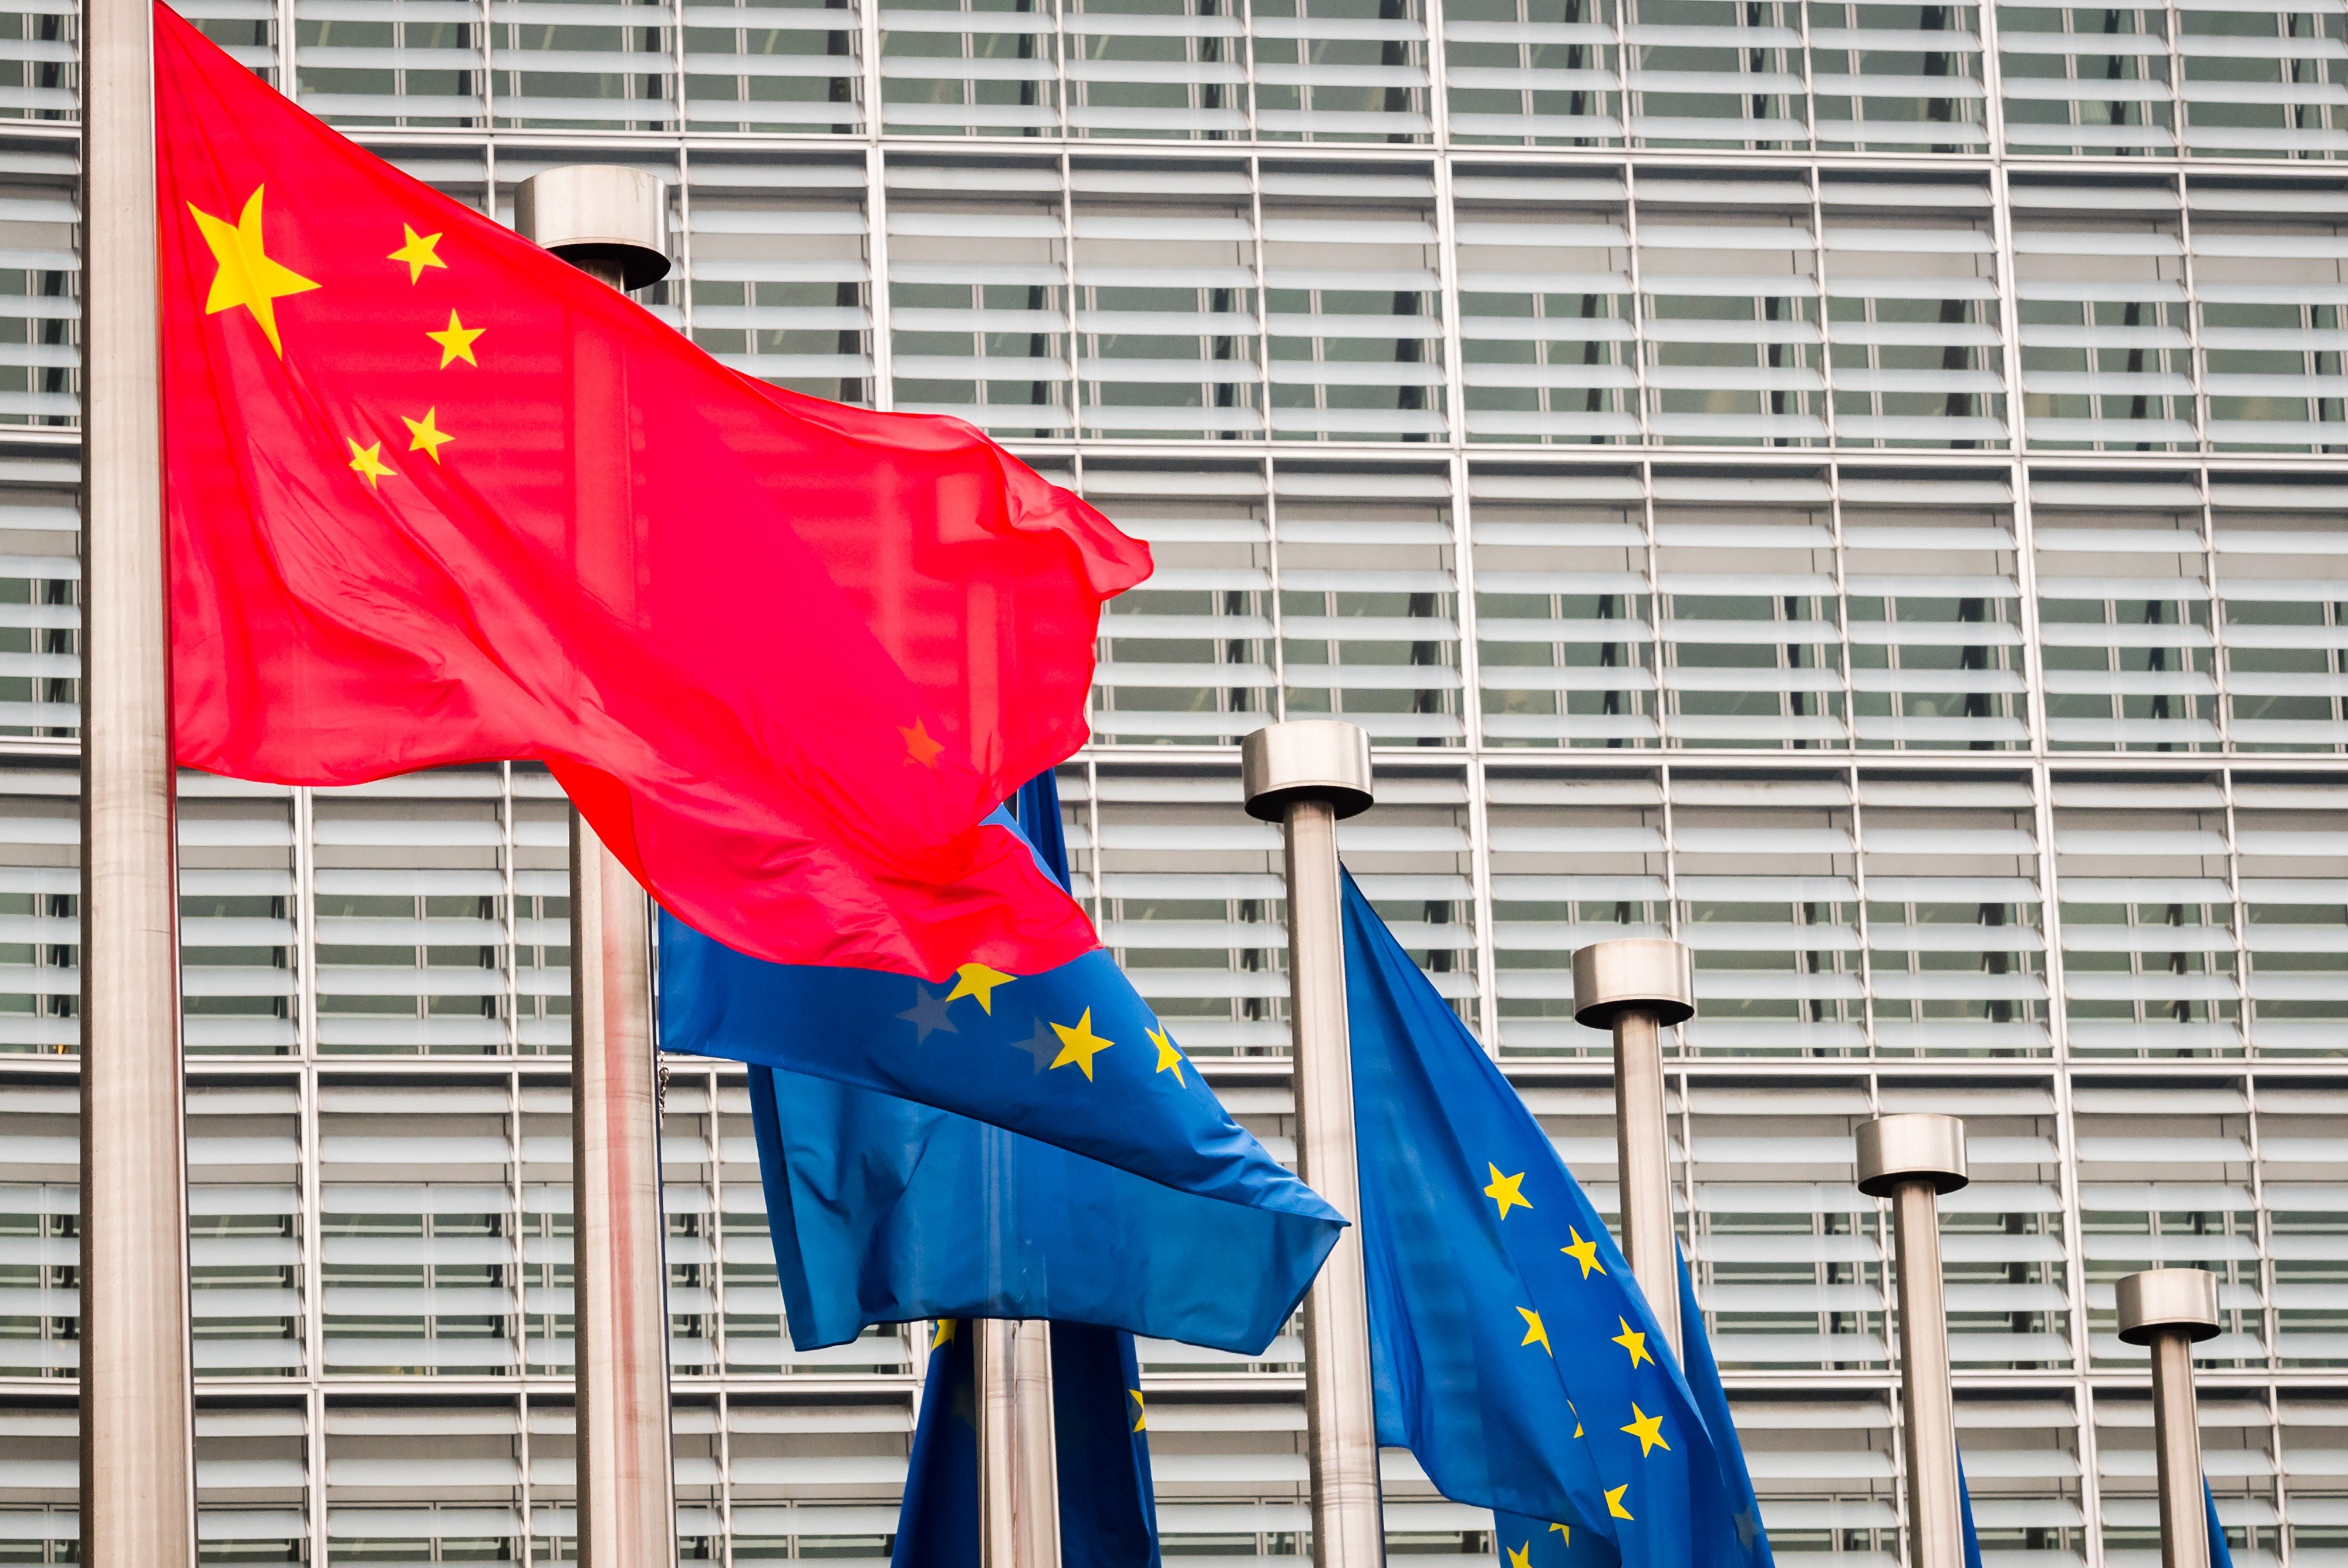 Only 4 per cent of respondents thought China-EU relations would improve this year. Photo: Bloomberg